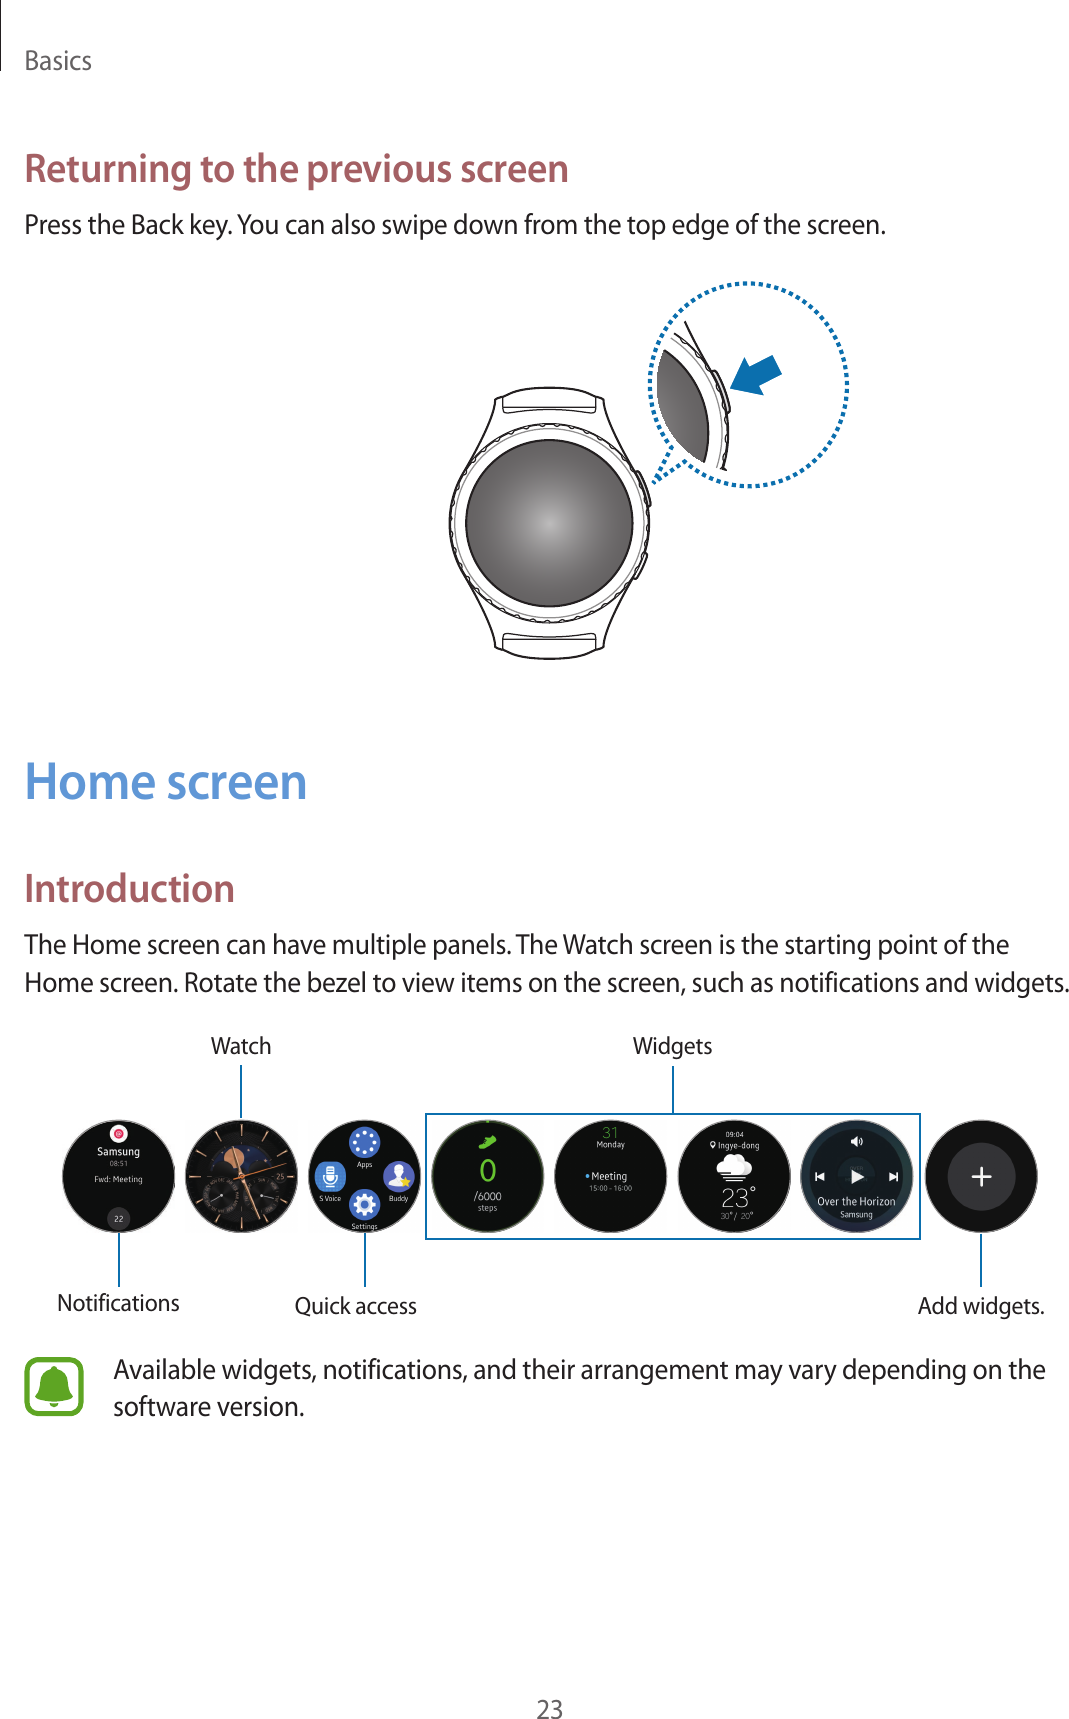 Basics23Returning to the previous screenPress the Back key. You can also swipe down from the top edge of the screen.Home screenIntroductionThe Home screen can have multiple panels. The Watch screen is the starting point of the Home screen. Rotate the bezel to view items on the screen, such as notifications and widgets.NotificationsWatchQuick accessWidgetsAdd widgets.Available widgets, notifications, and their arrangement may vary depending on the software version.